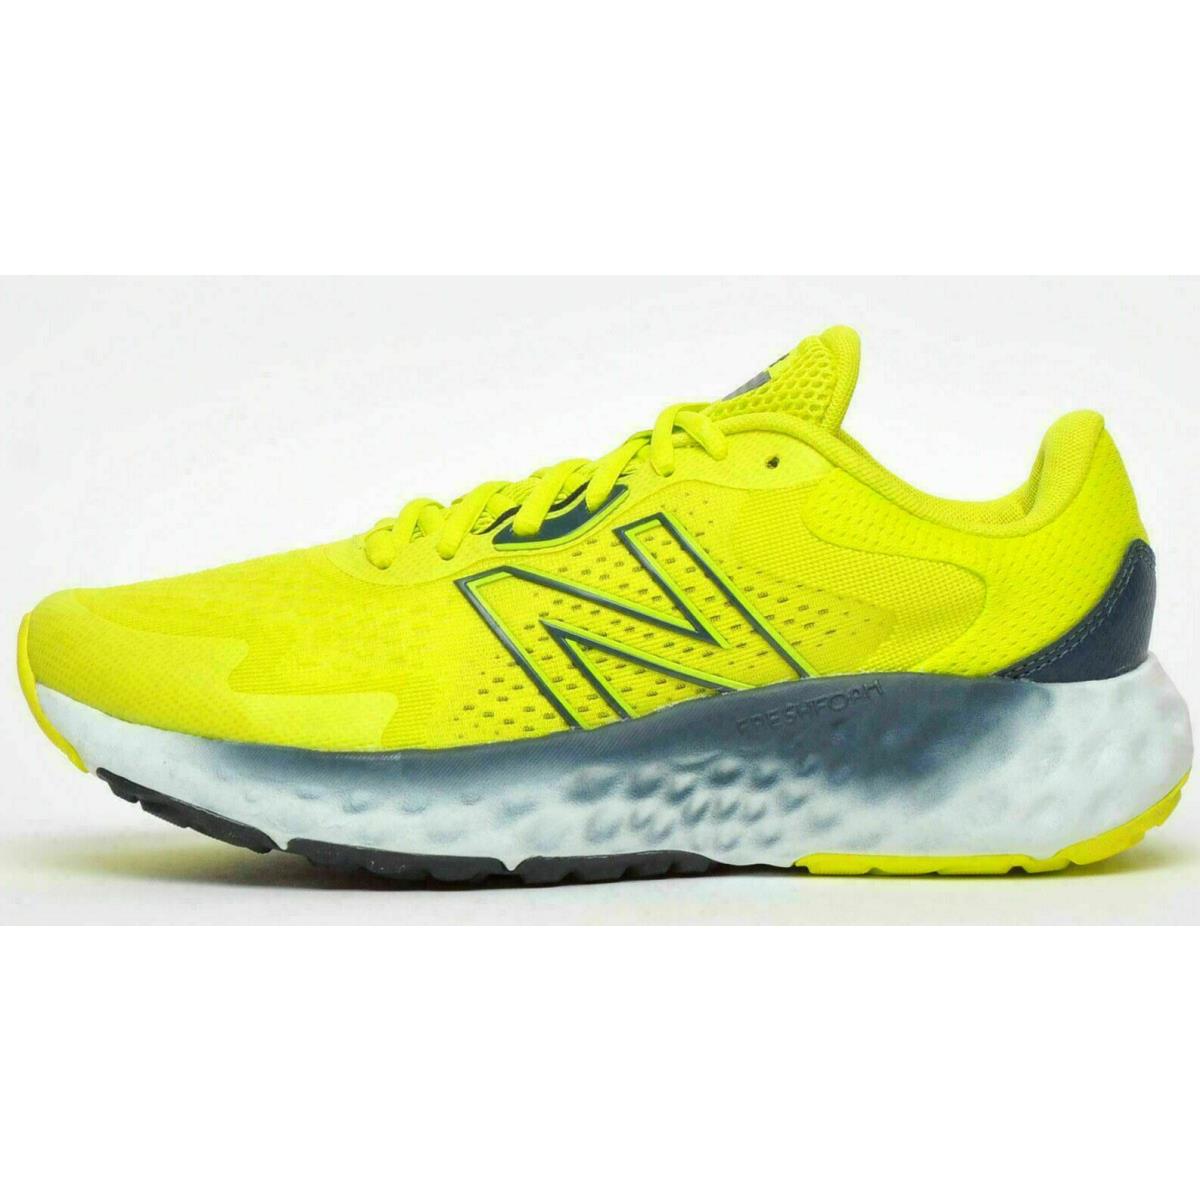 New Balance Fresh Foam Evoz Men`s Running Shoes Size 10.5 11 14 Yellow New US Size 10.5 Color Yellow